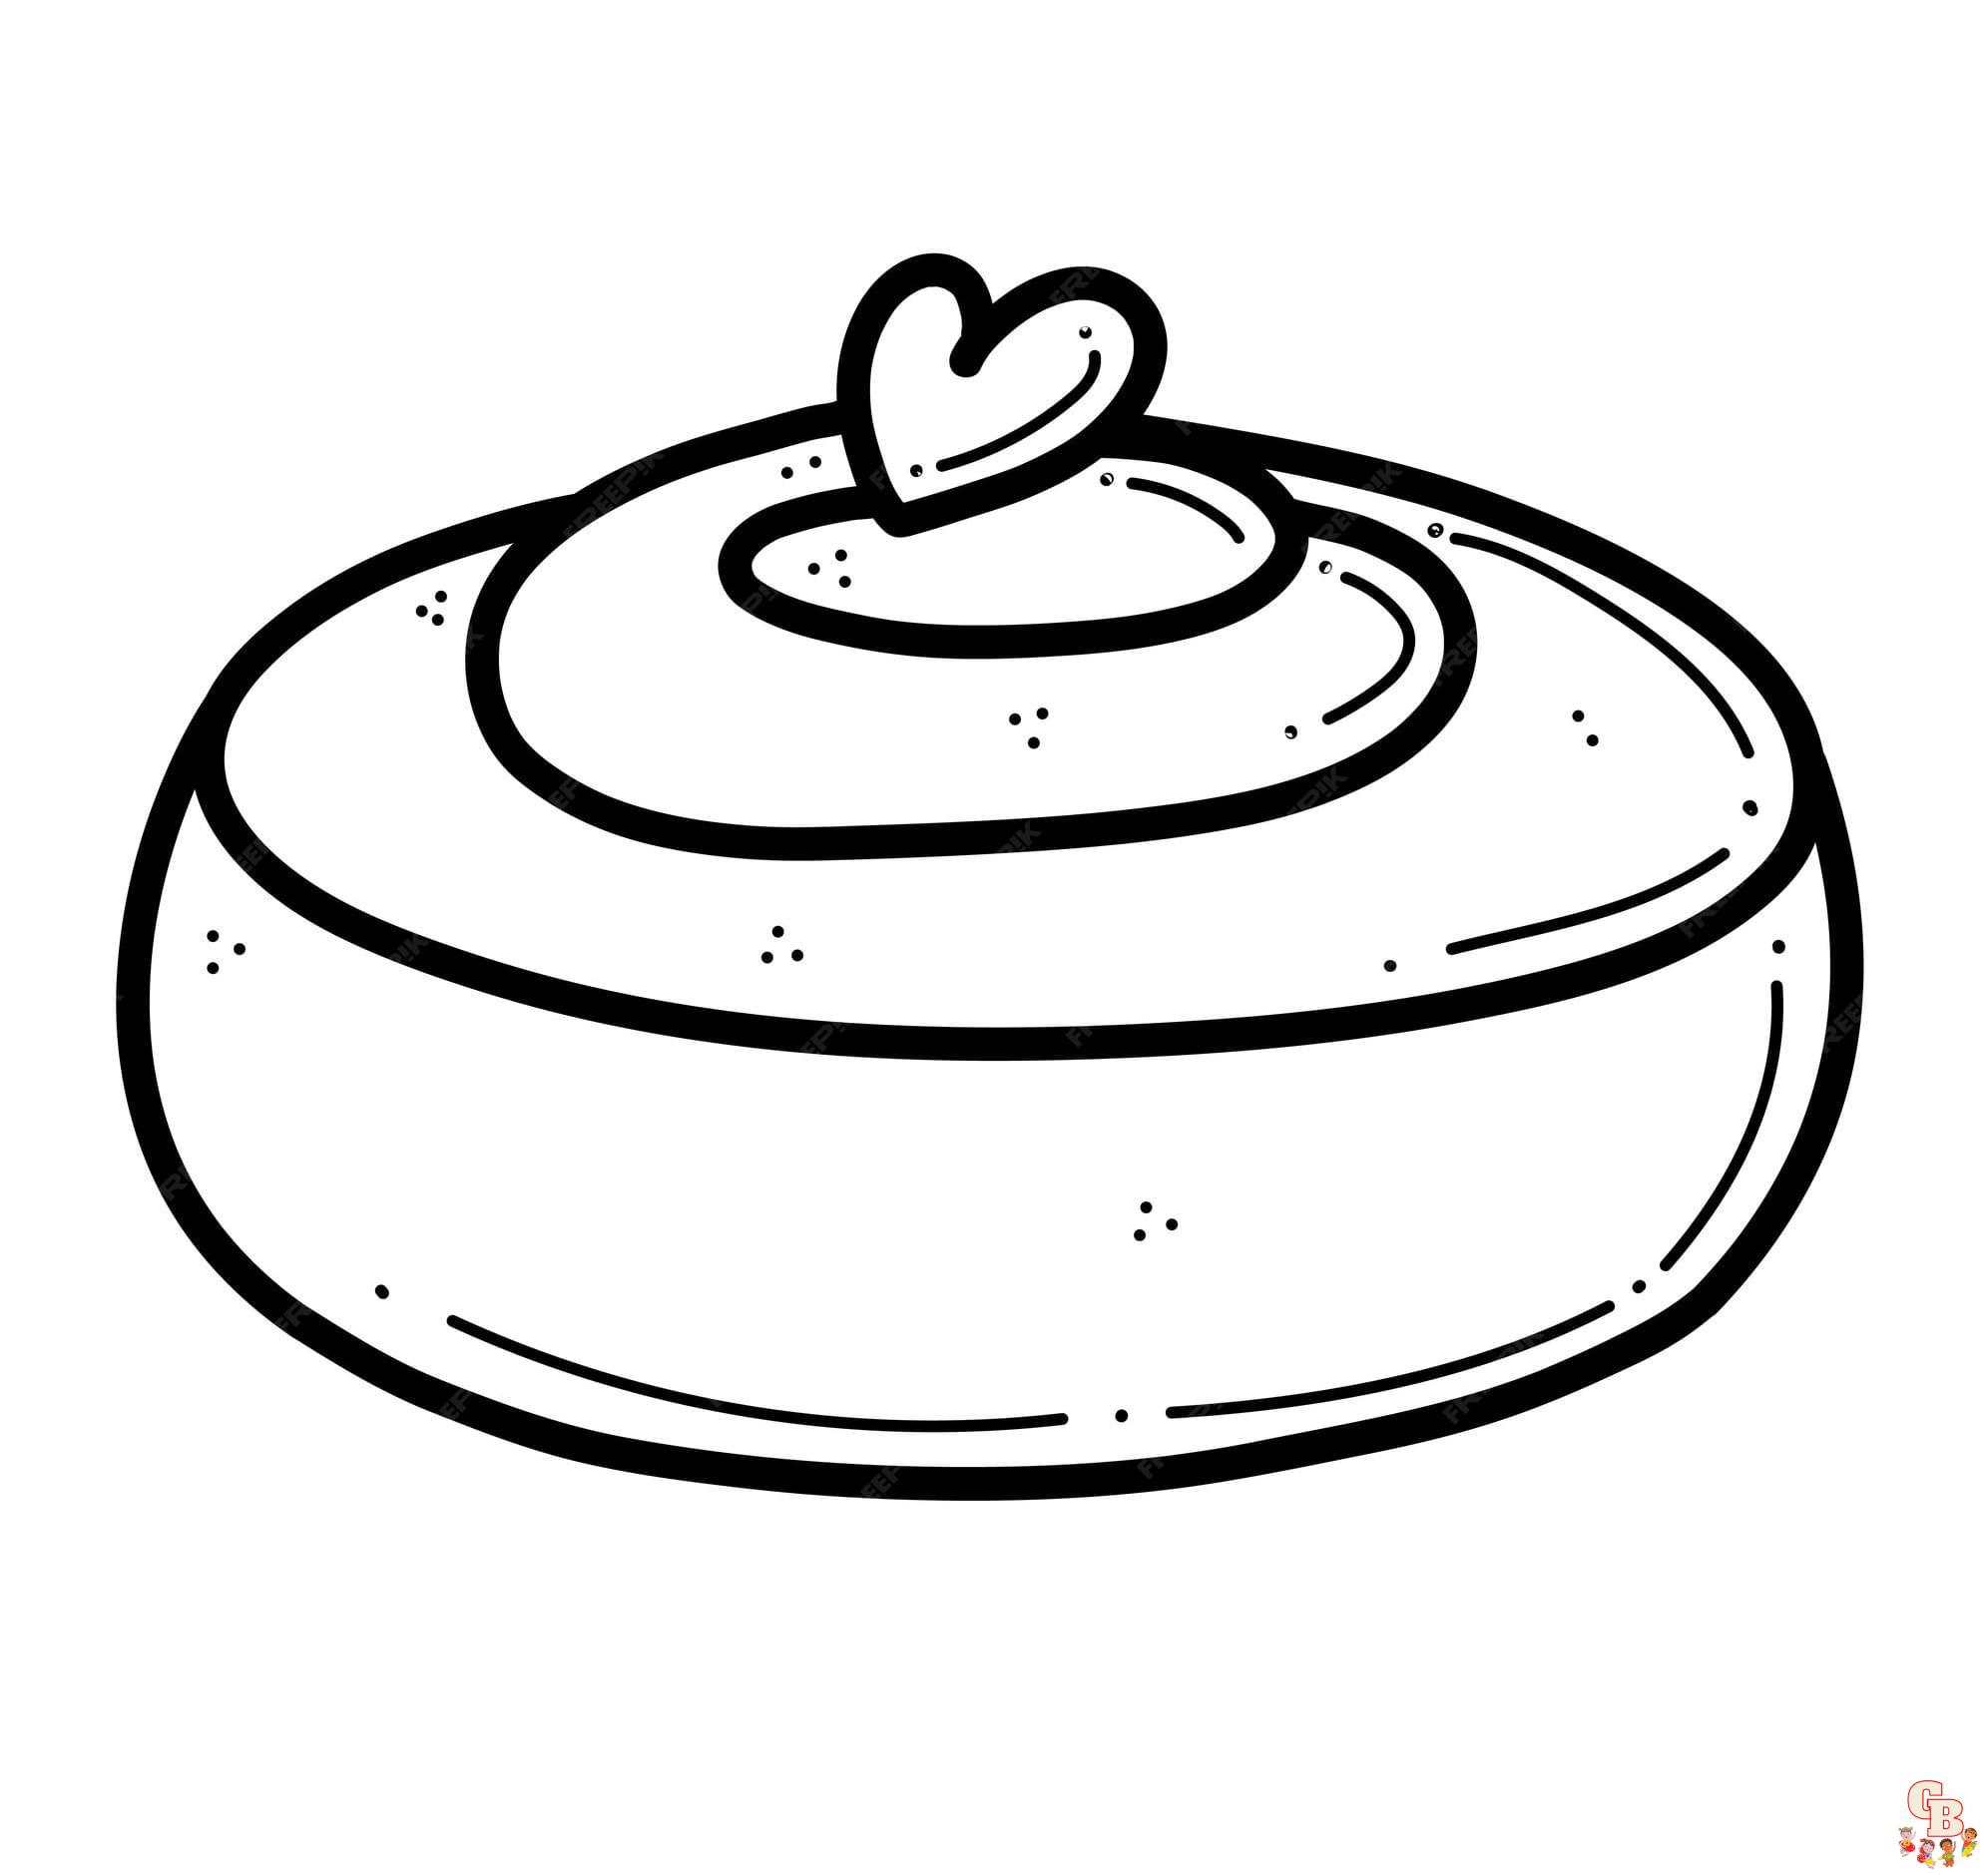 Cinnamon roll coloring pages printable free